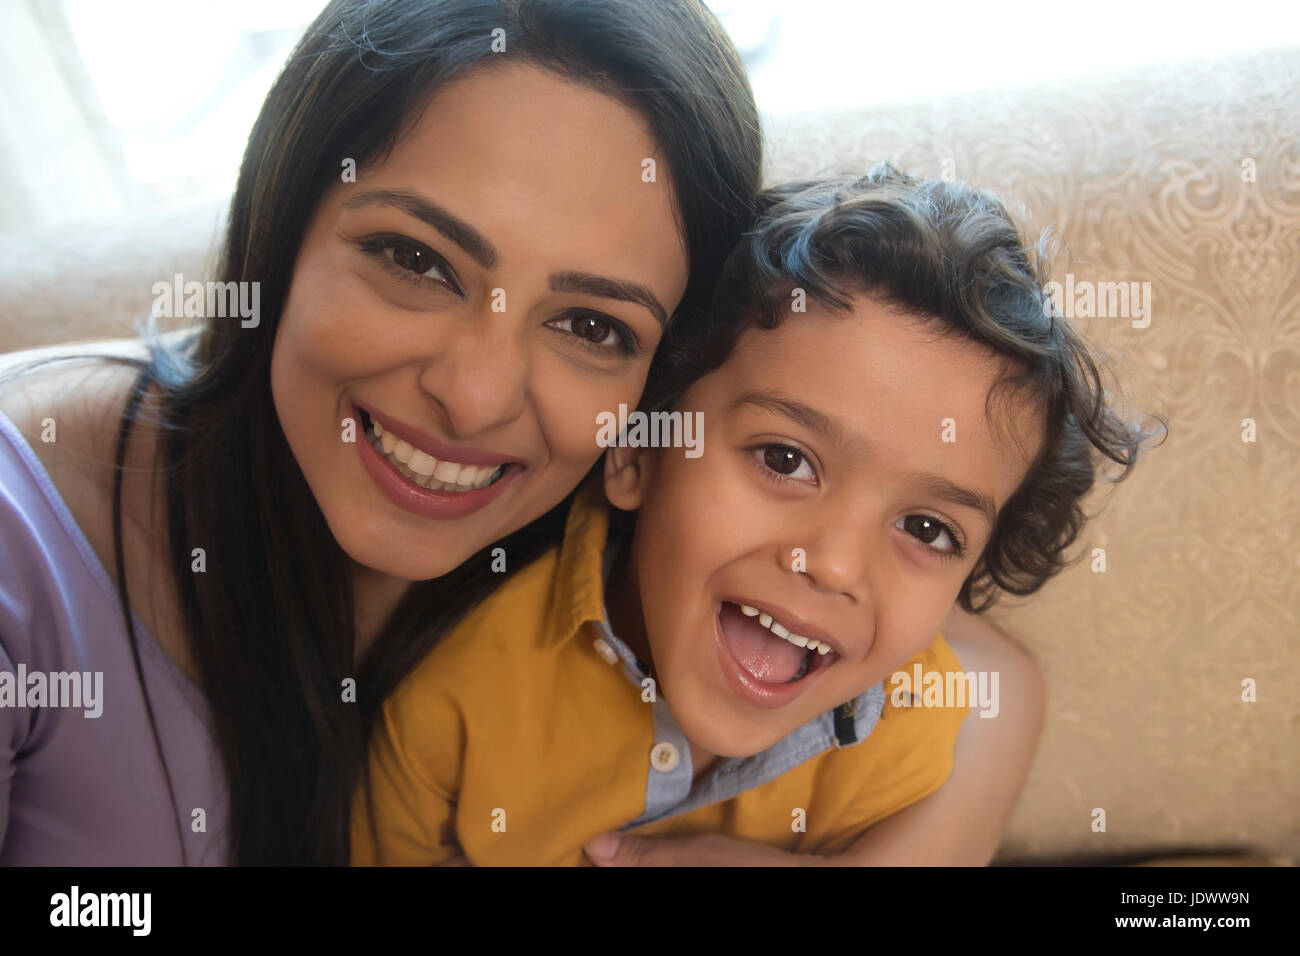 Close-up Portrait of mother and daughter smiling Banque D'Images